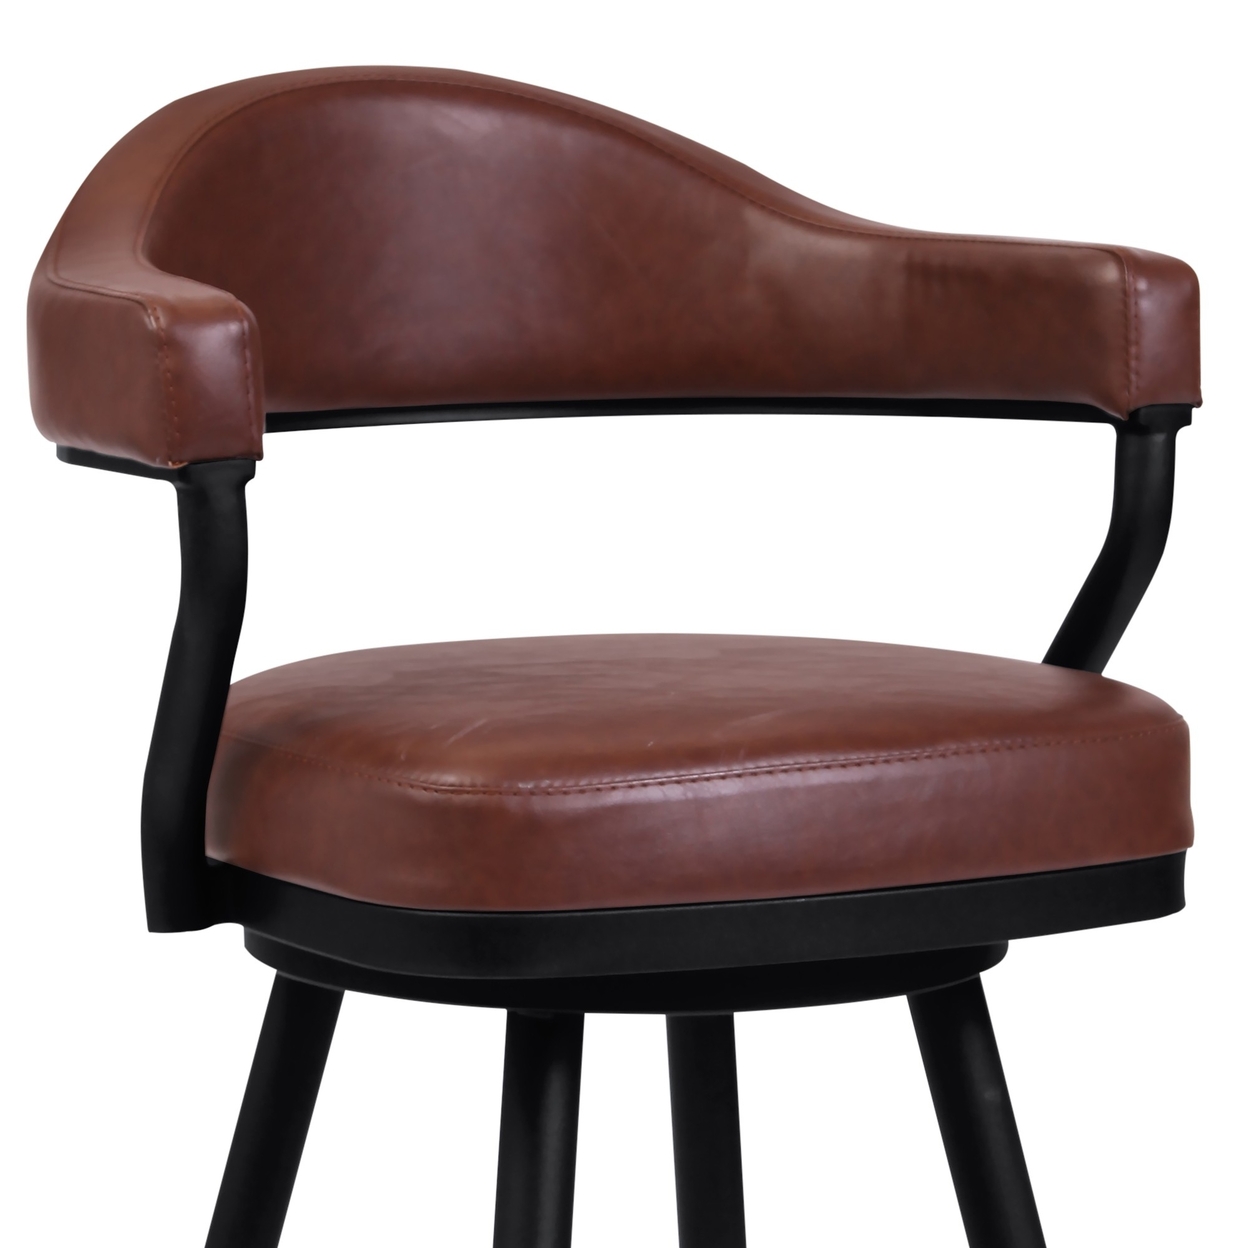 Knw 30 Inch Swivel Barstool Armchair, Camel, Vintage Brown Faux Leather- Saltoro Sherpi